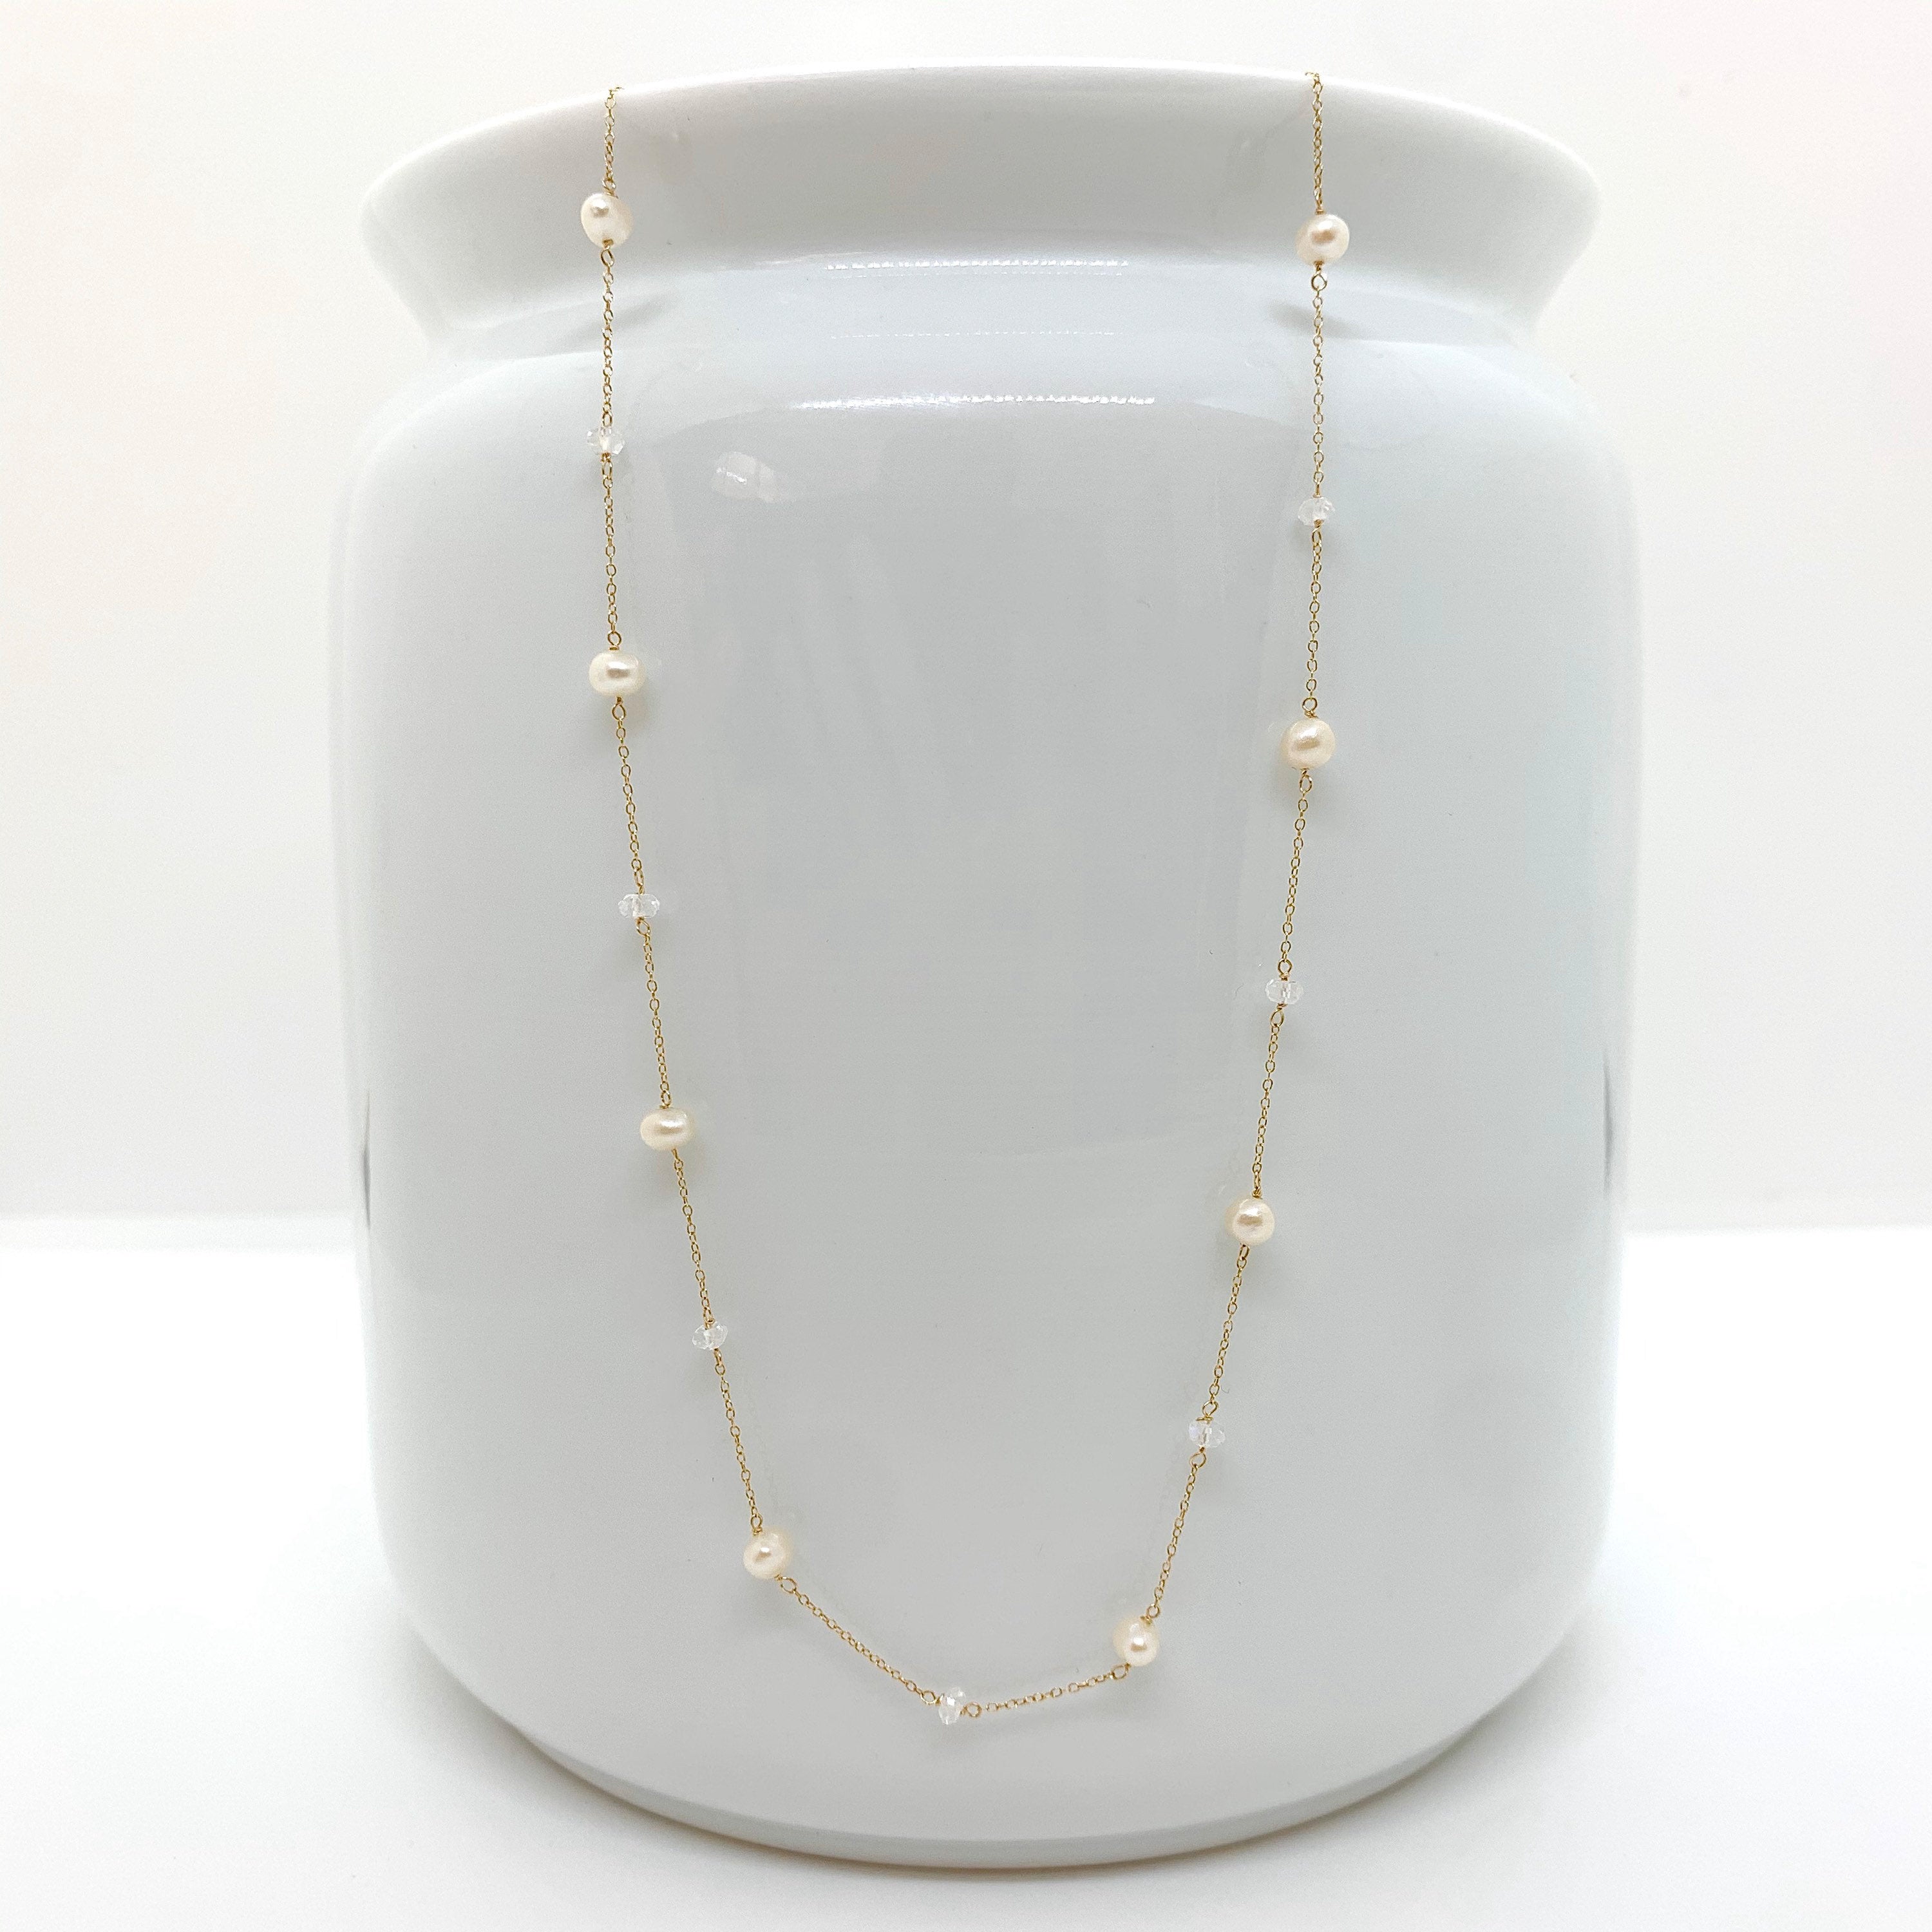 14k Gold Chain Necklace w/ Freshwater Pearls & Moonstone